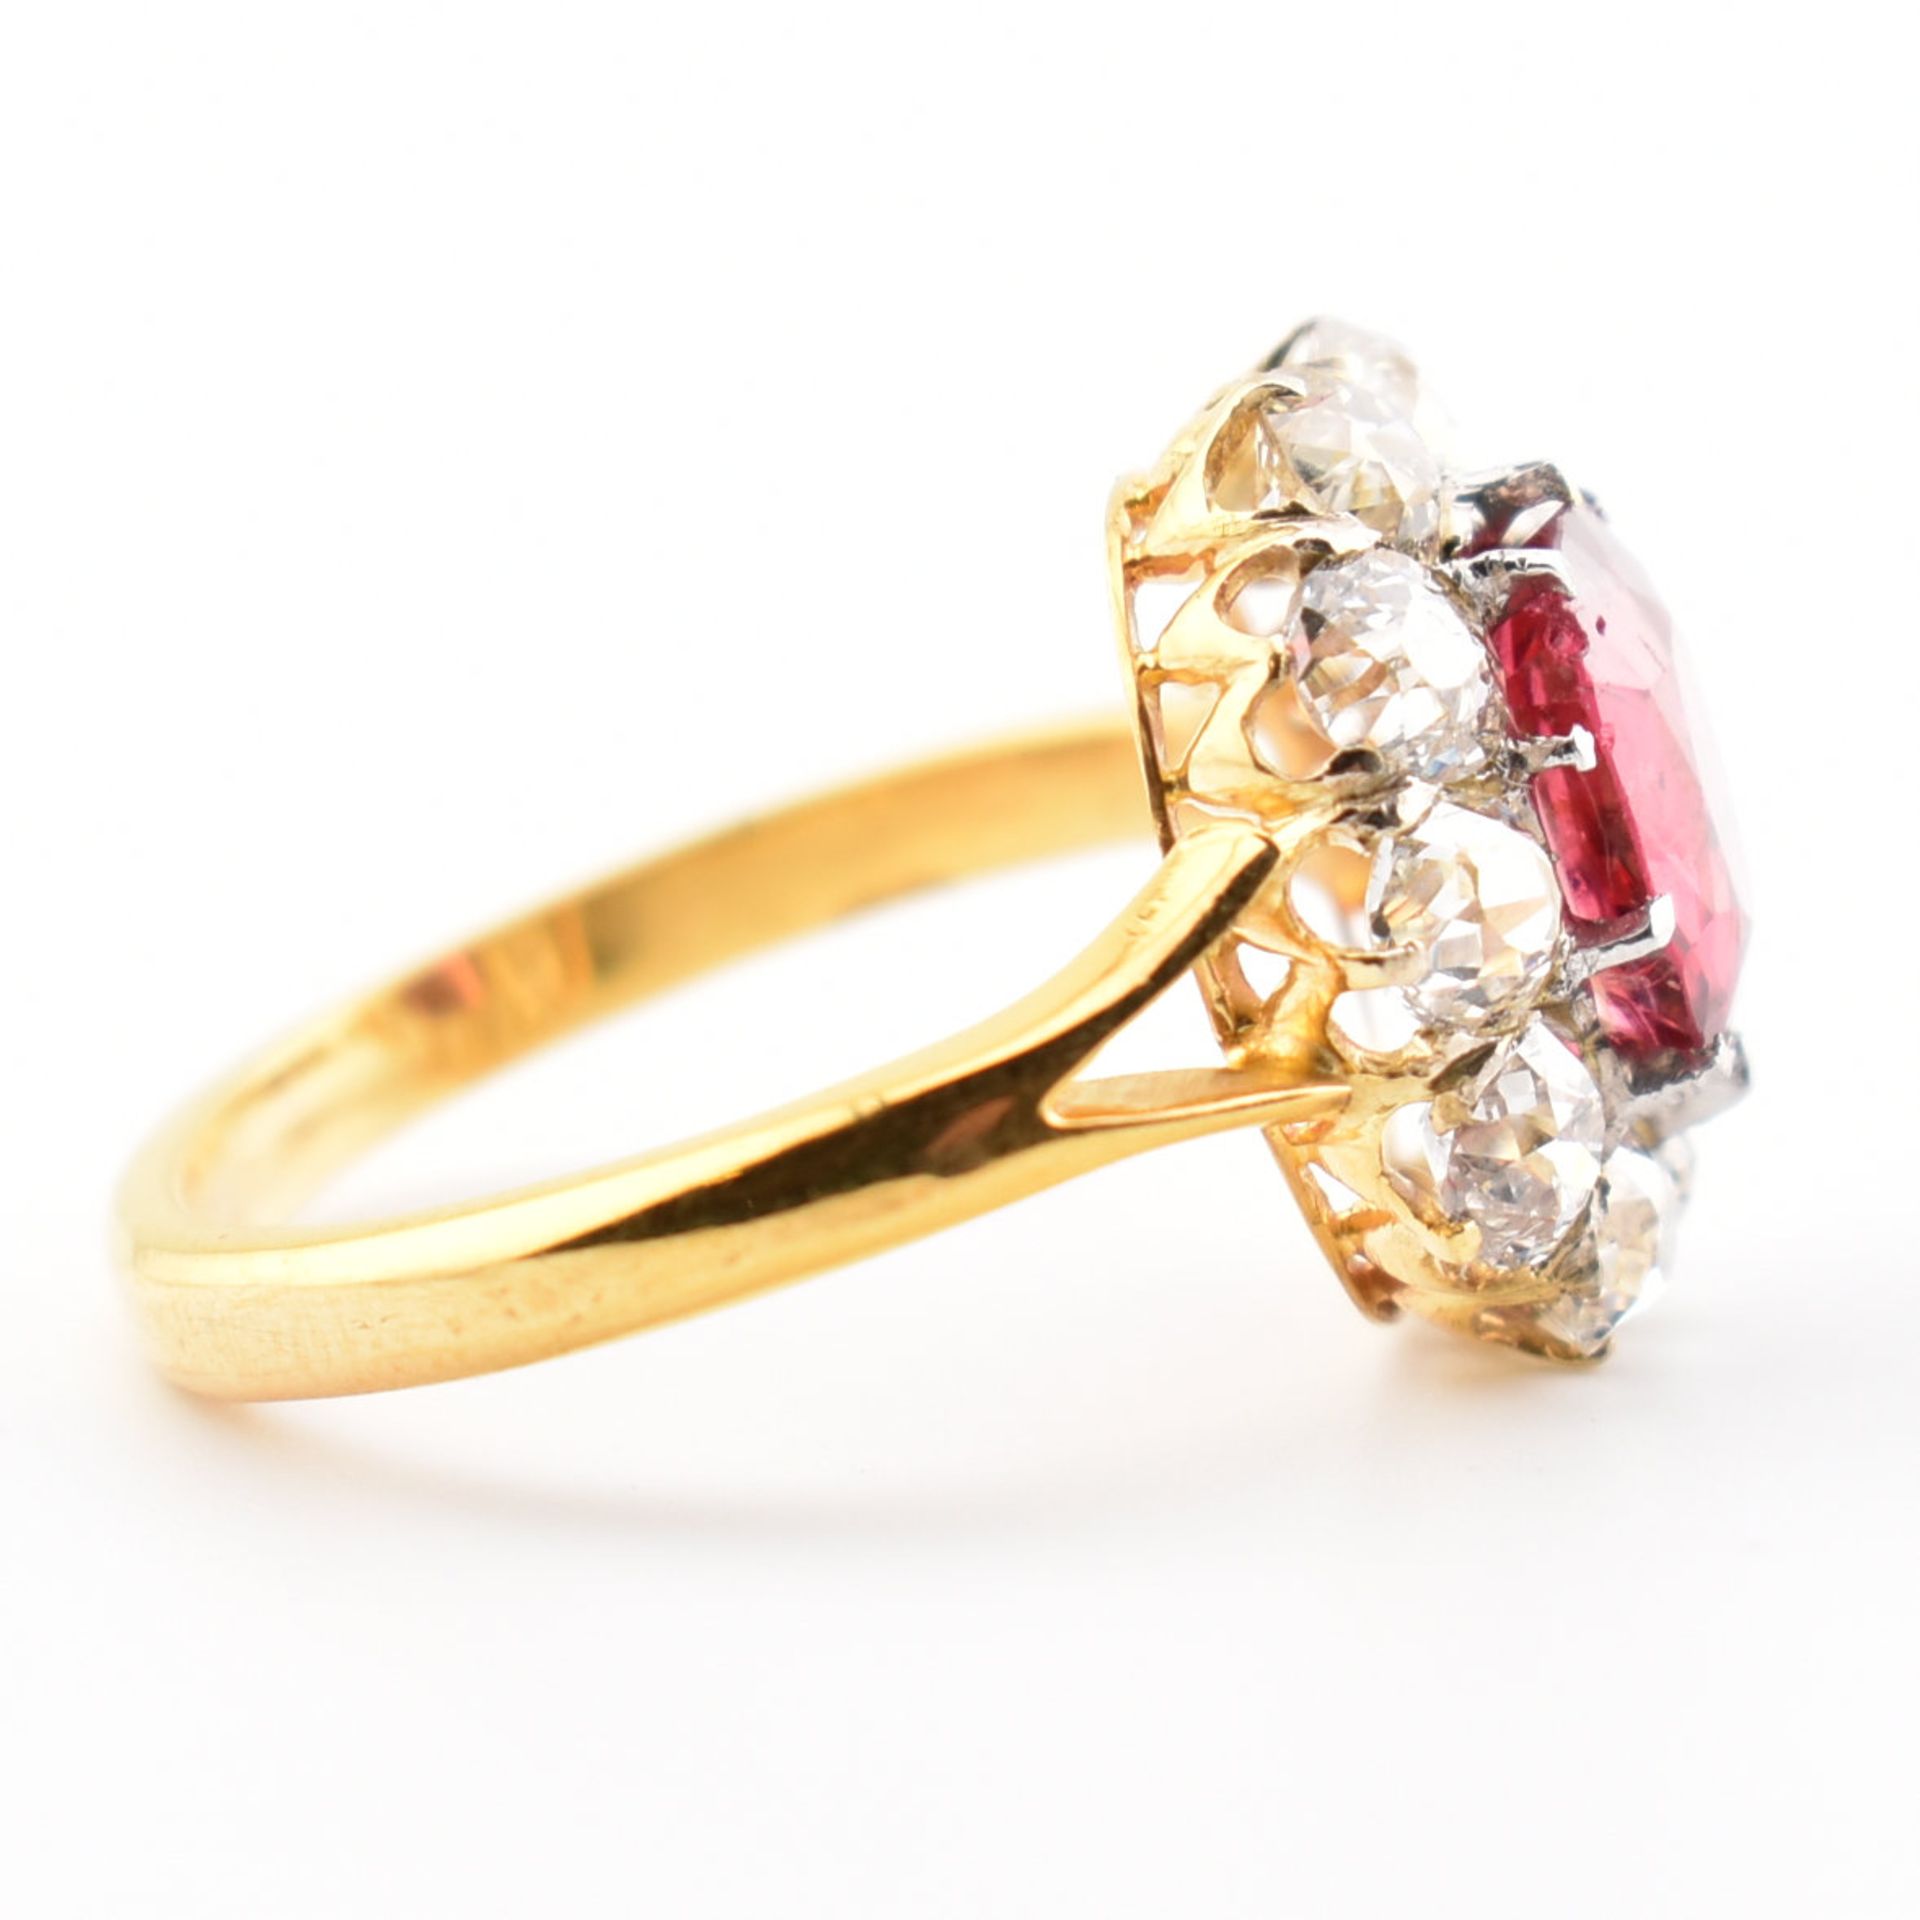 VICTORIAN RED SPINEL & DIAMOND CLUSTER RING - Image 3 of 12